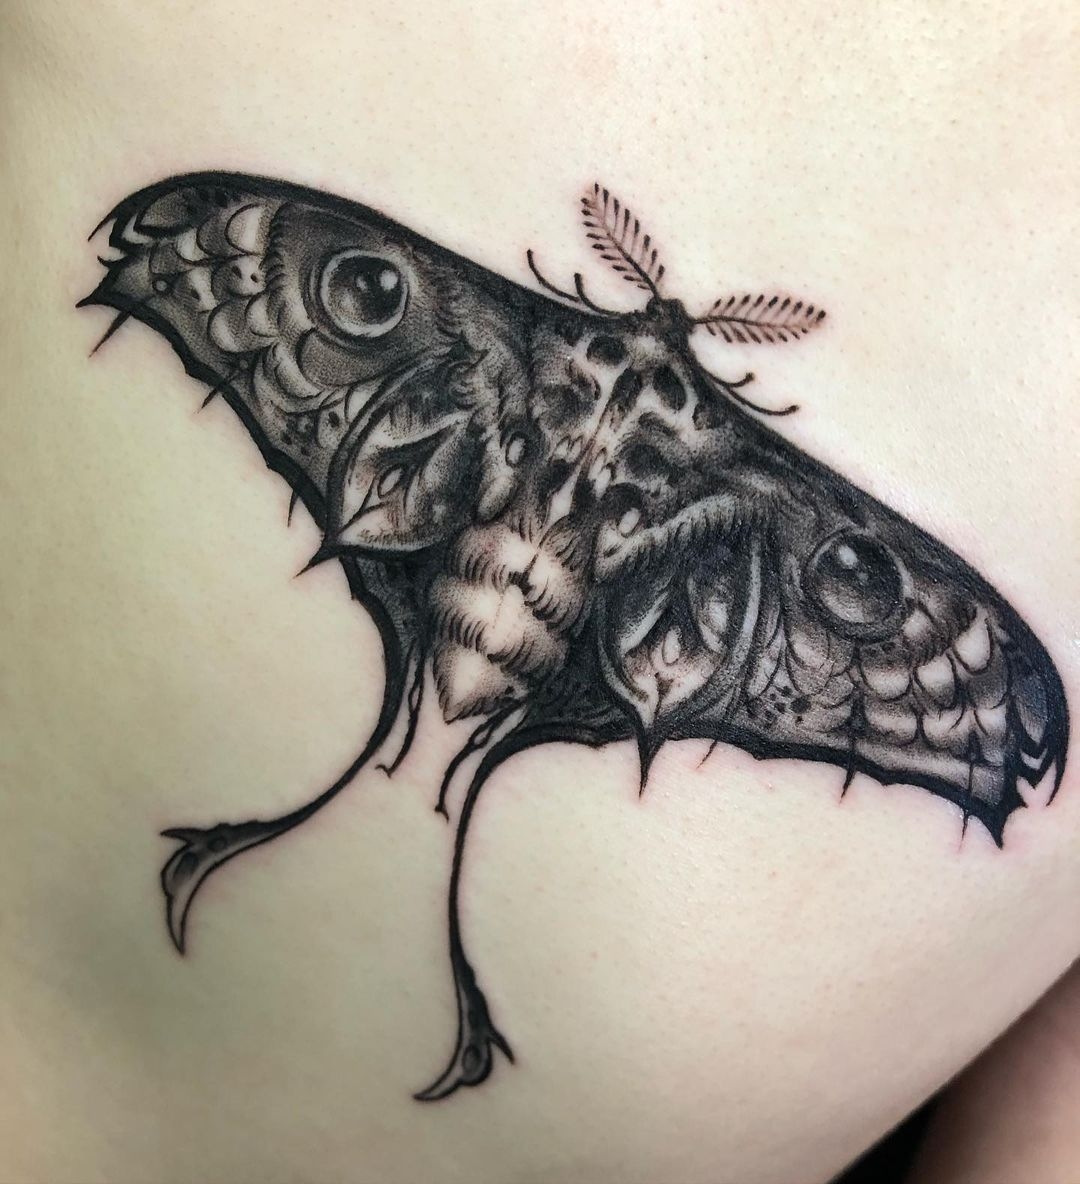 Tattoo Artist Shaine Smith tattoo in black and grey - incredible detailed moth tattoo